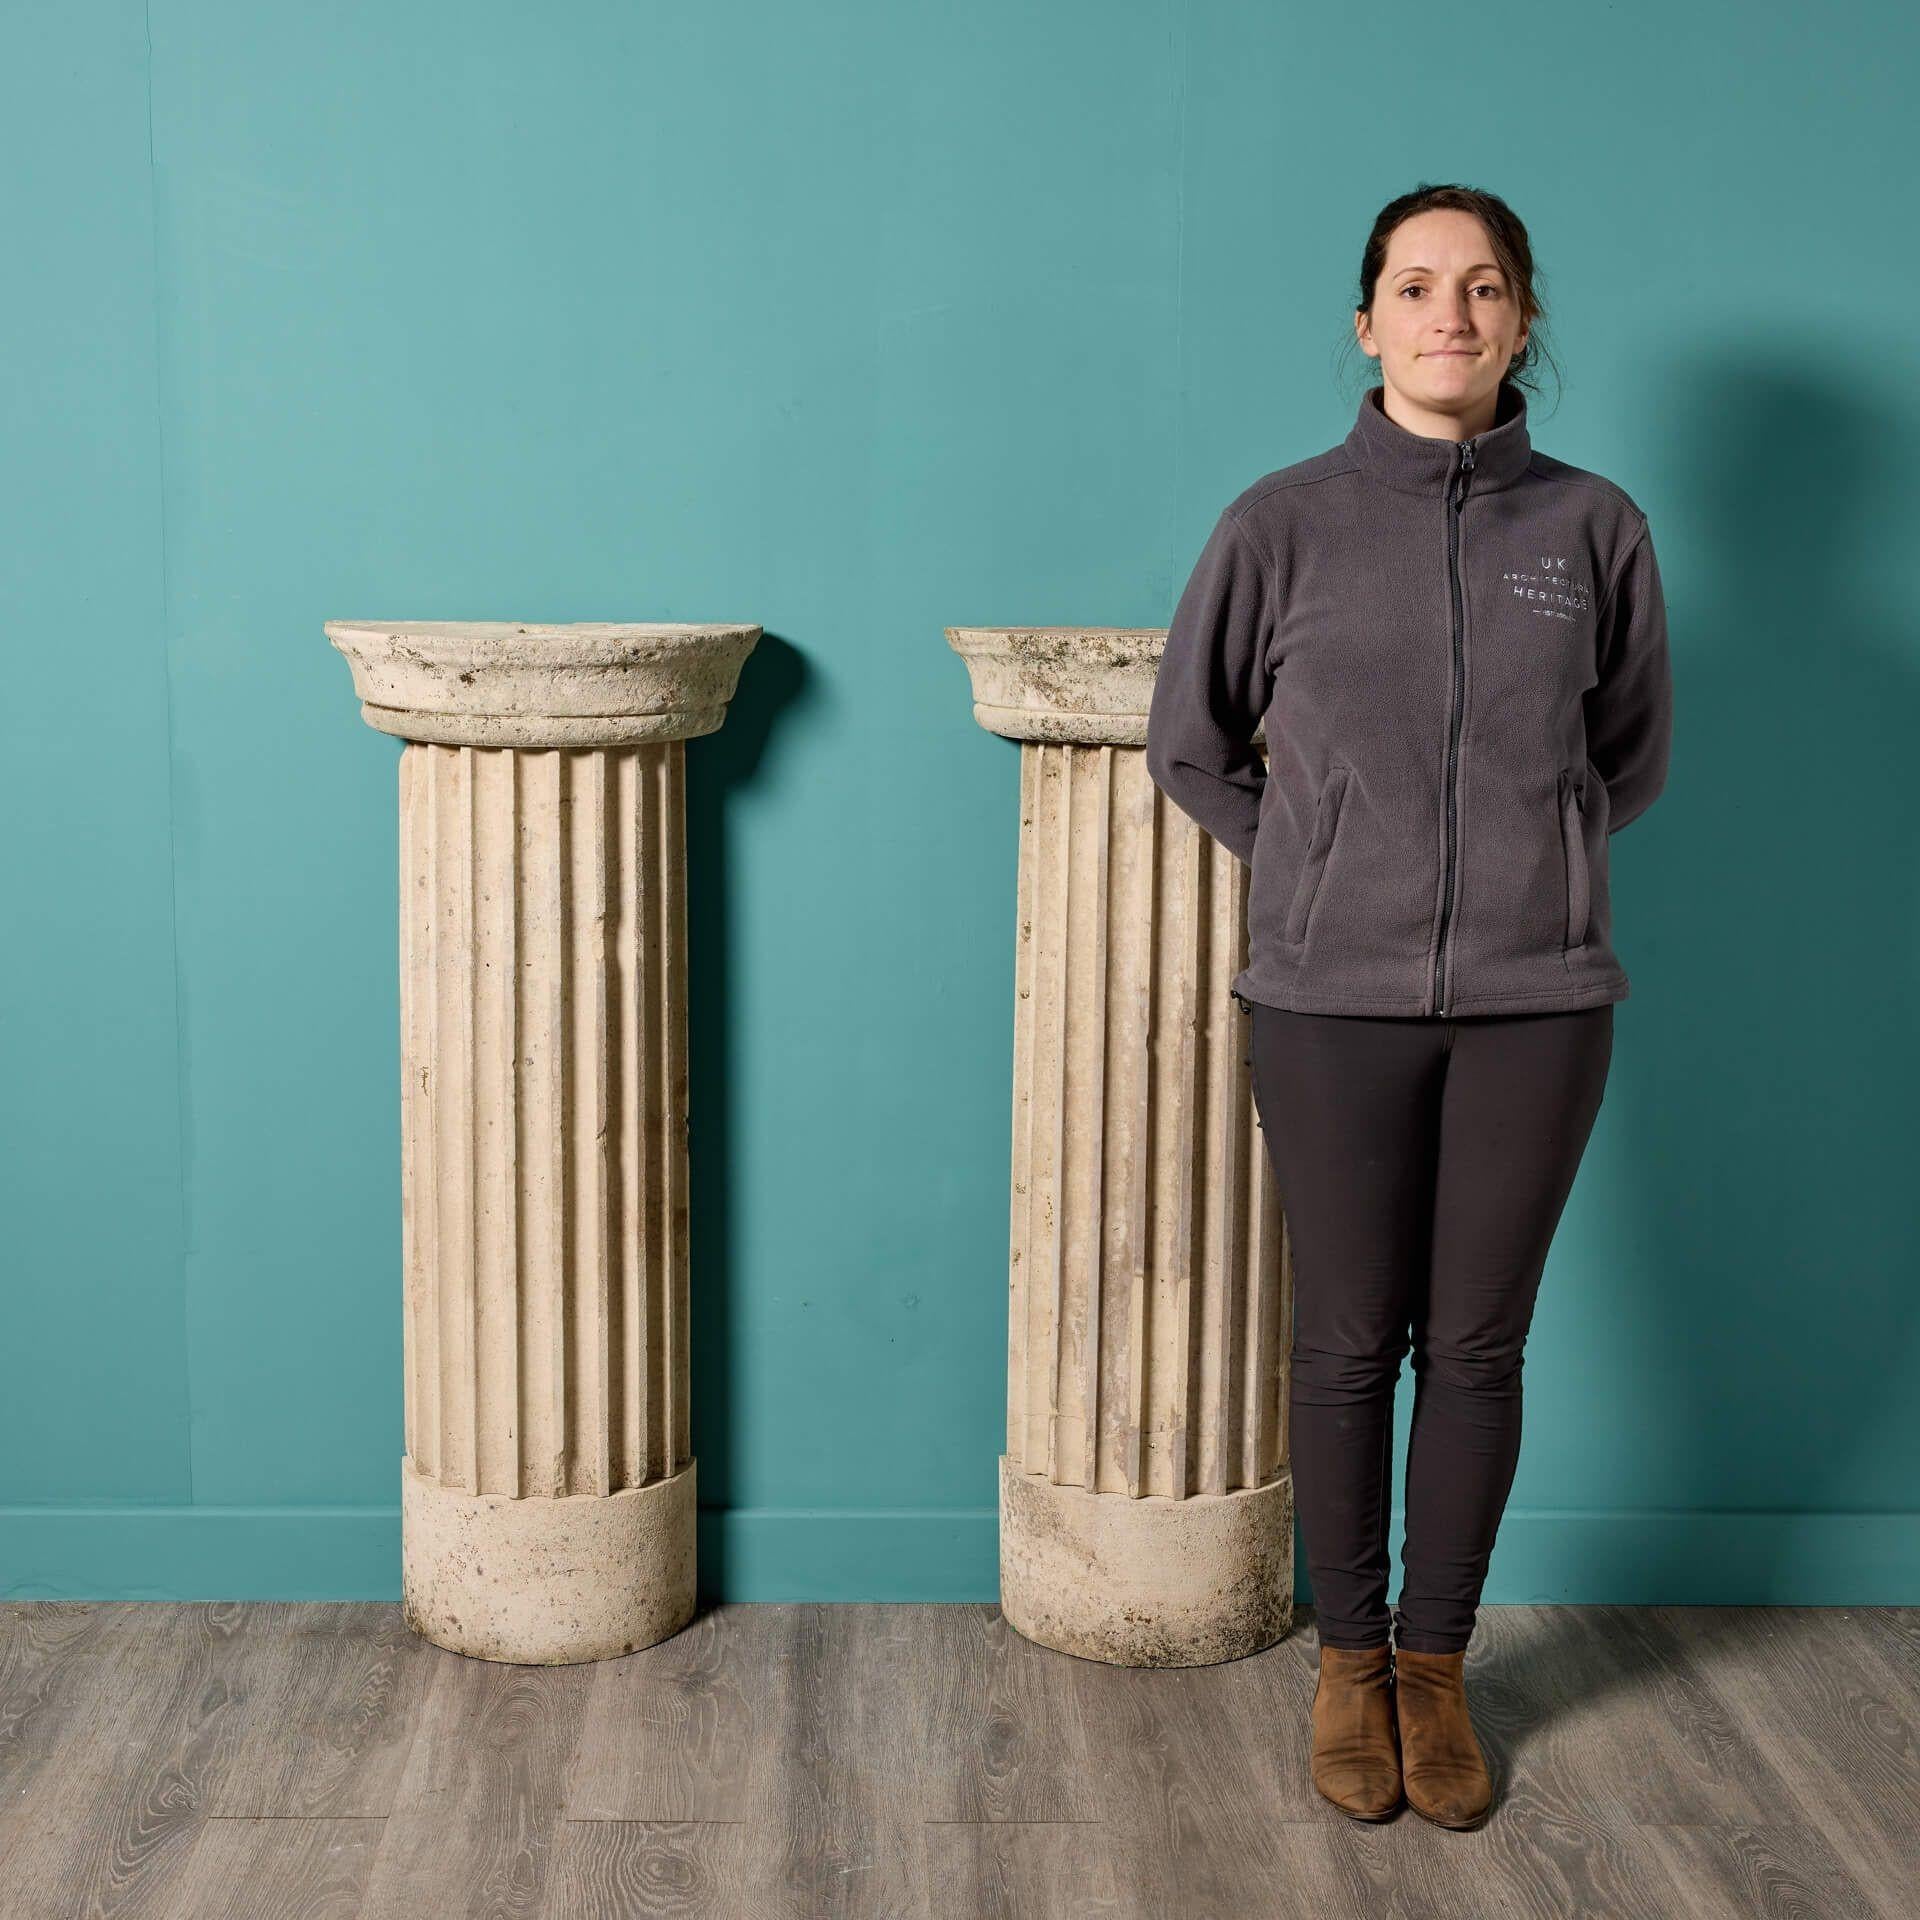 An impressive pair of English neoclassical style Portland limestone column pedestals dating to circa 1800. Suitable for use as display plinths or simply architectural features, these 220-year-old late Georgian stone columns are evocative of the